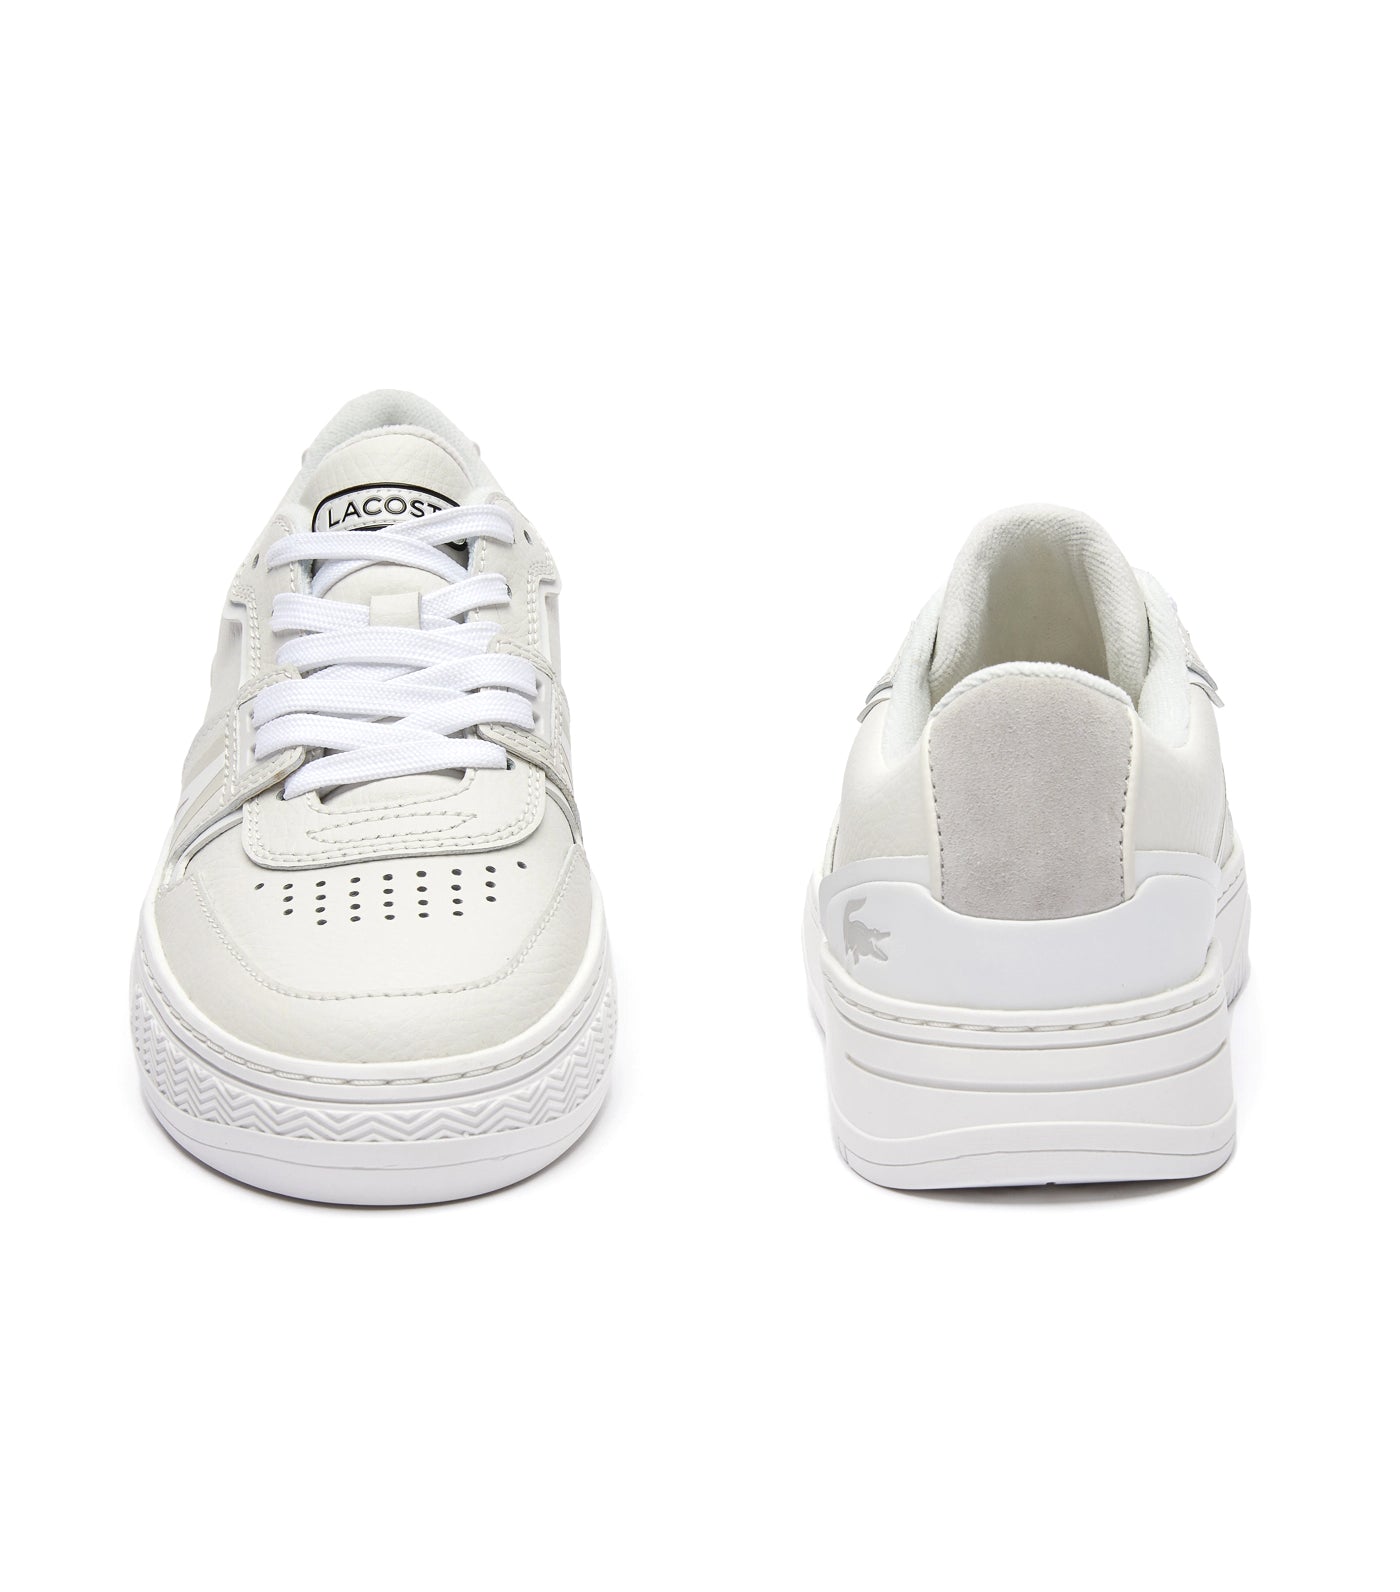 Women's L001 0321 1 Leather Sneakers White/Off White